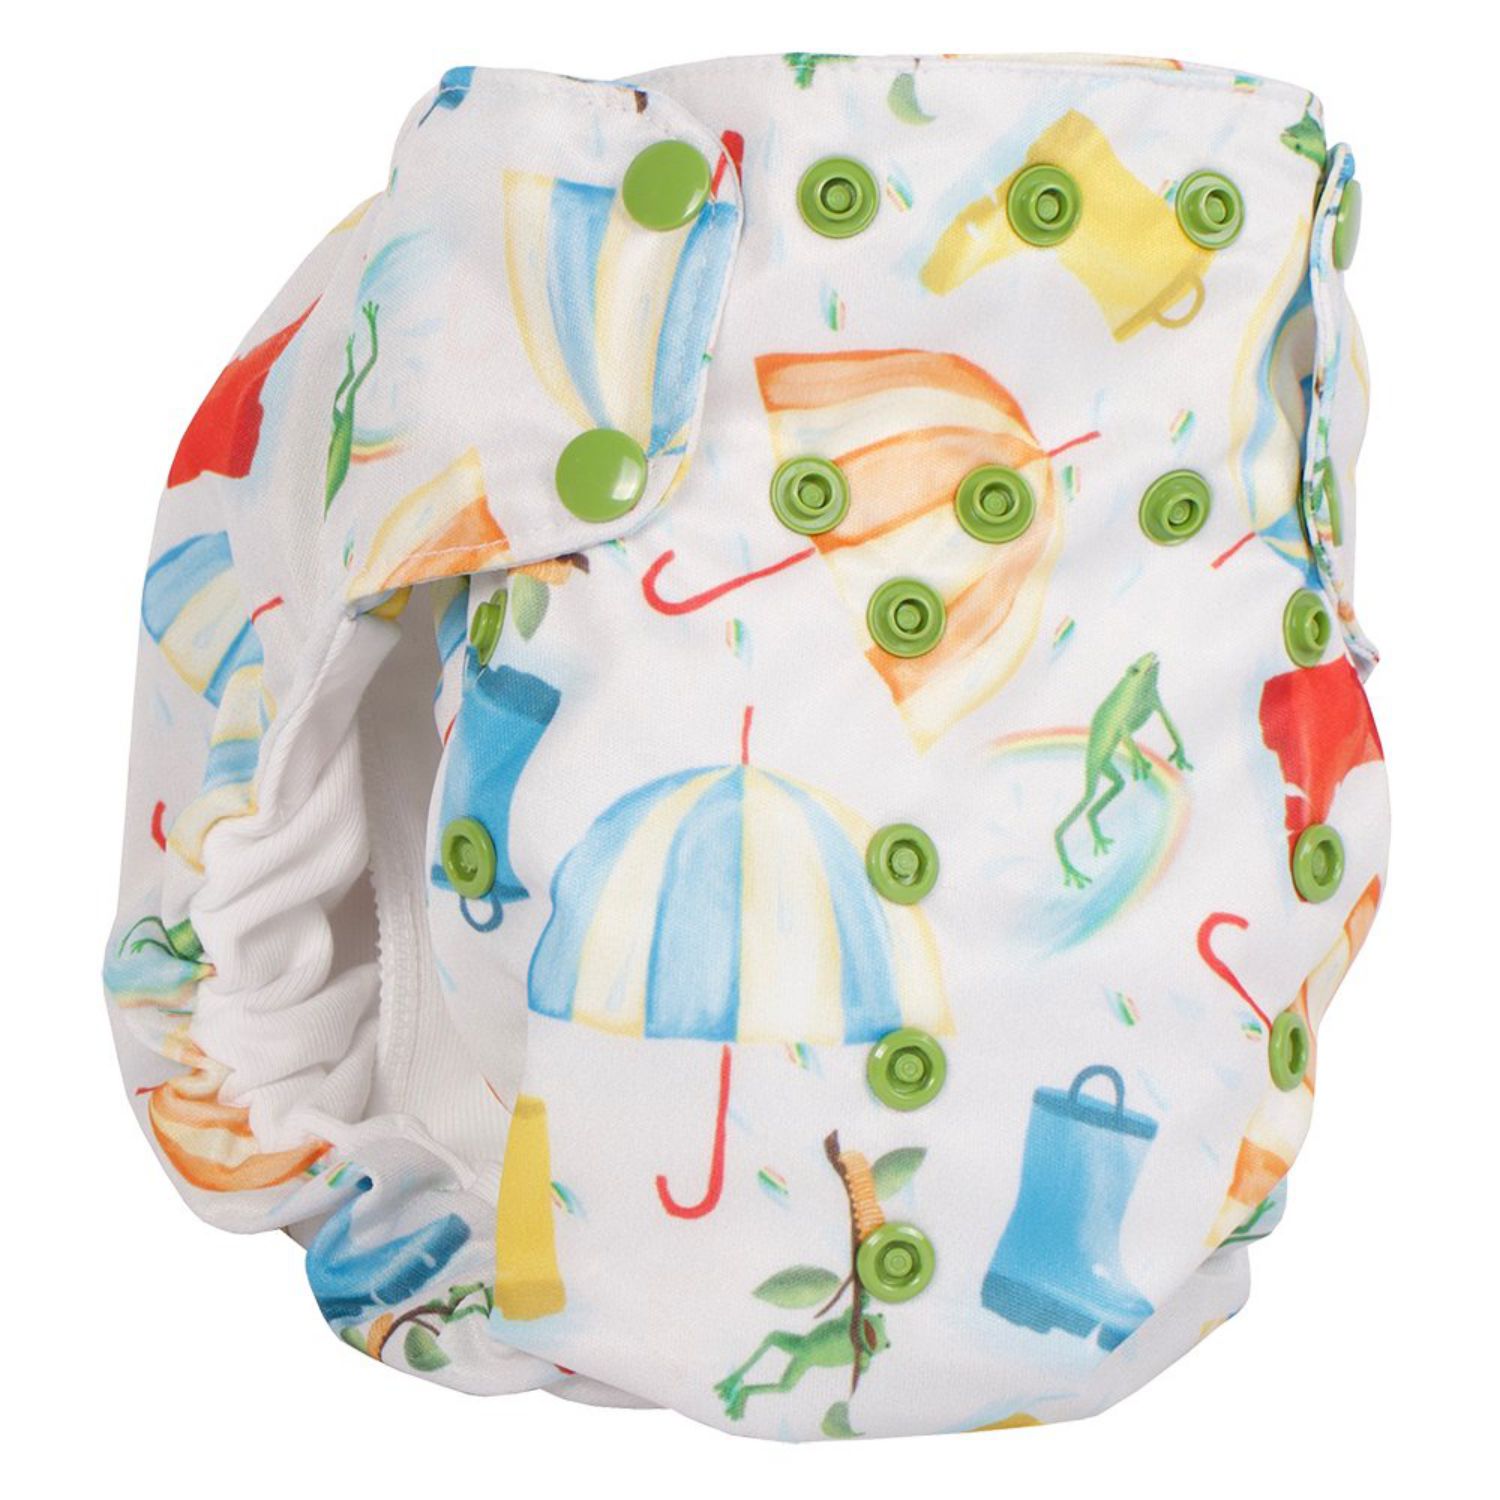 Smart Bottoms Dream Diaper 2.0 AIO One Size Pattern: Rainy Day